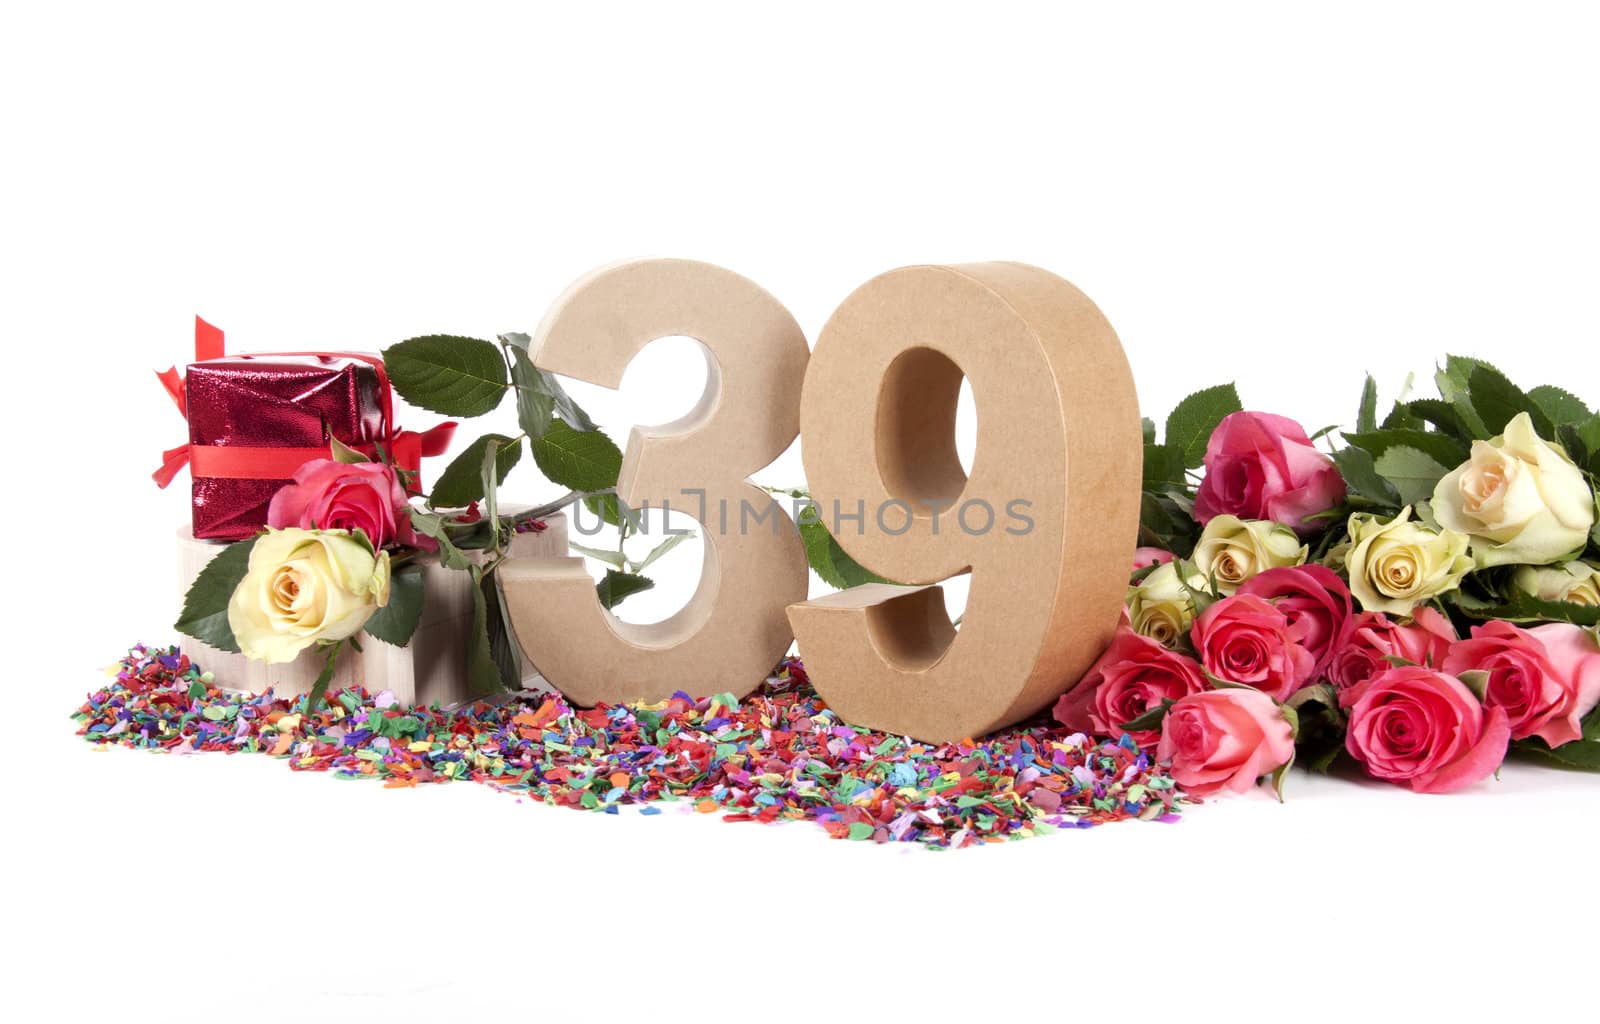 Number of age in a colorful studio setting with fresh roses on a bottom of confetti